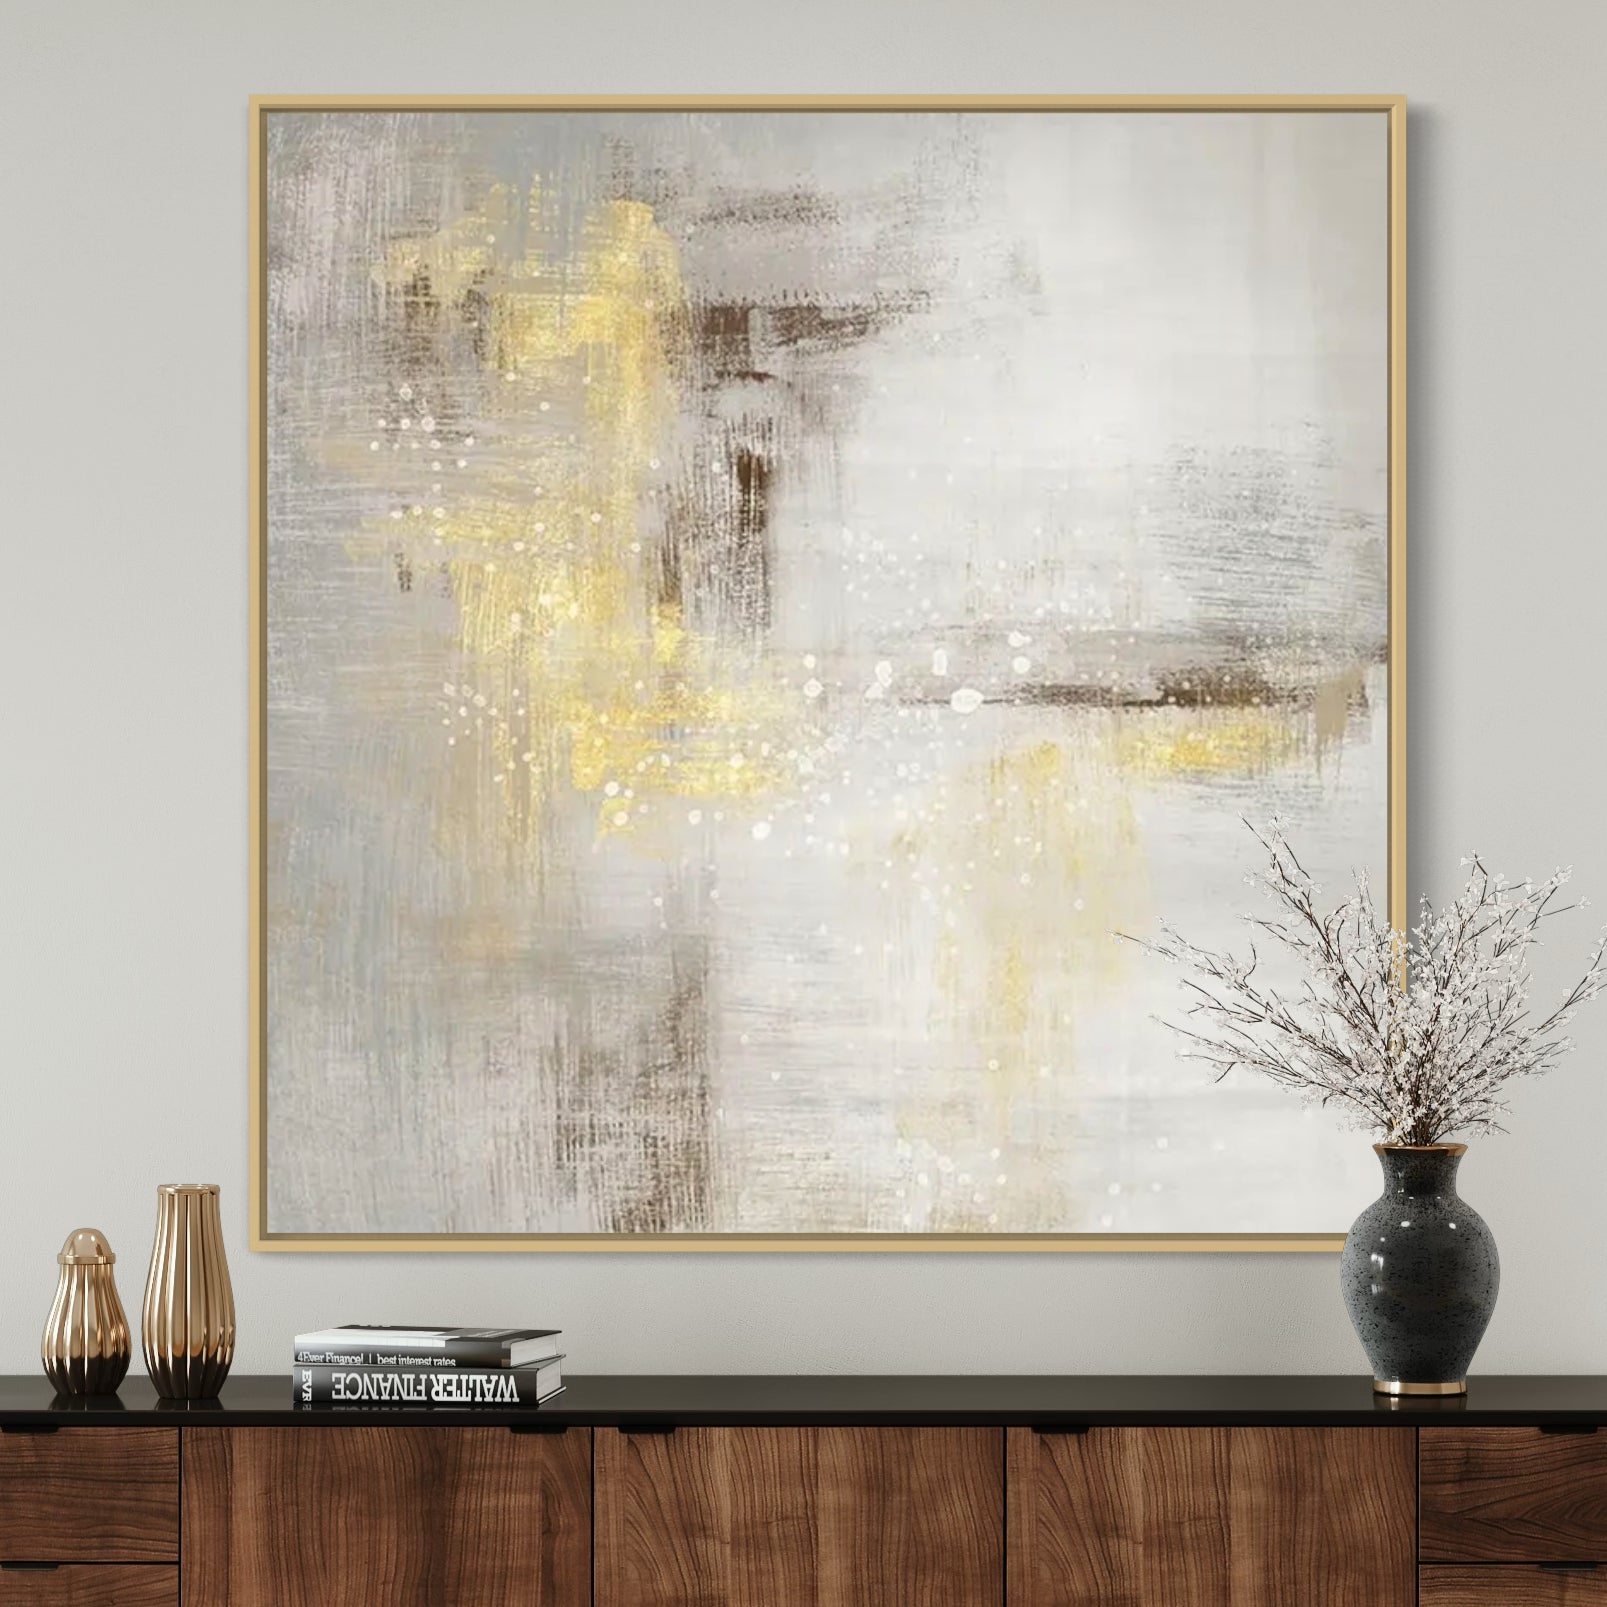 The World Of Light, Champagne / 150x150cm